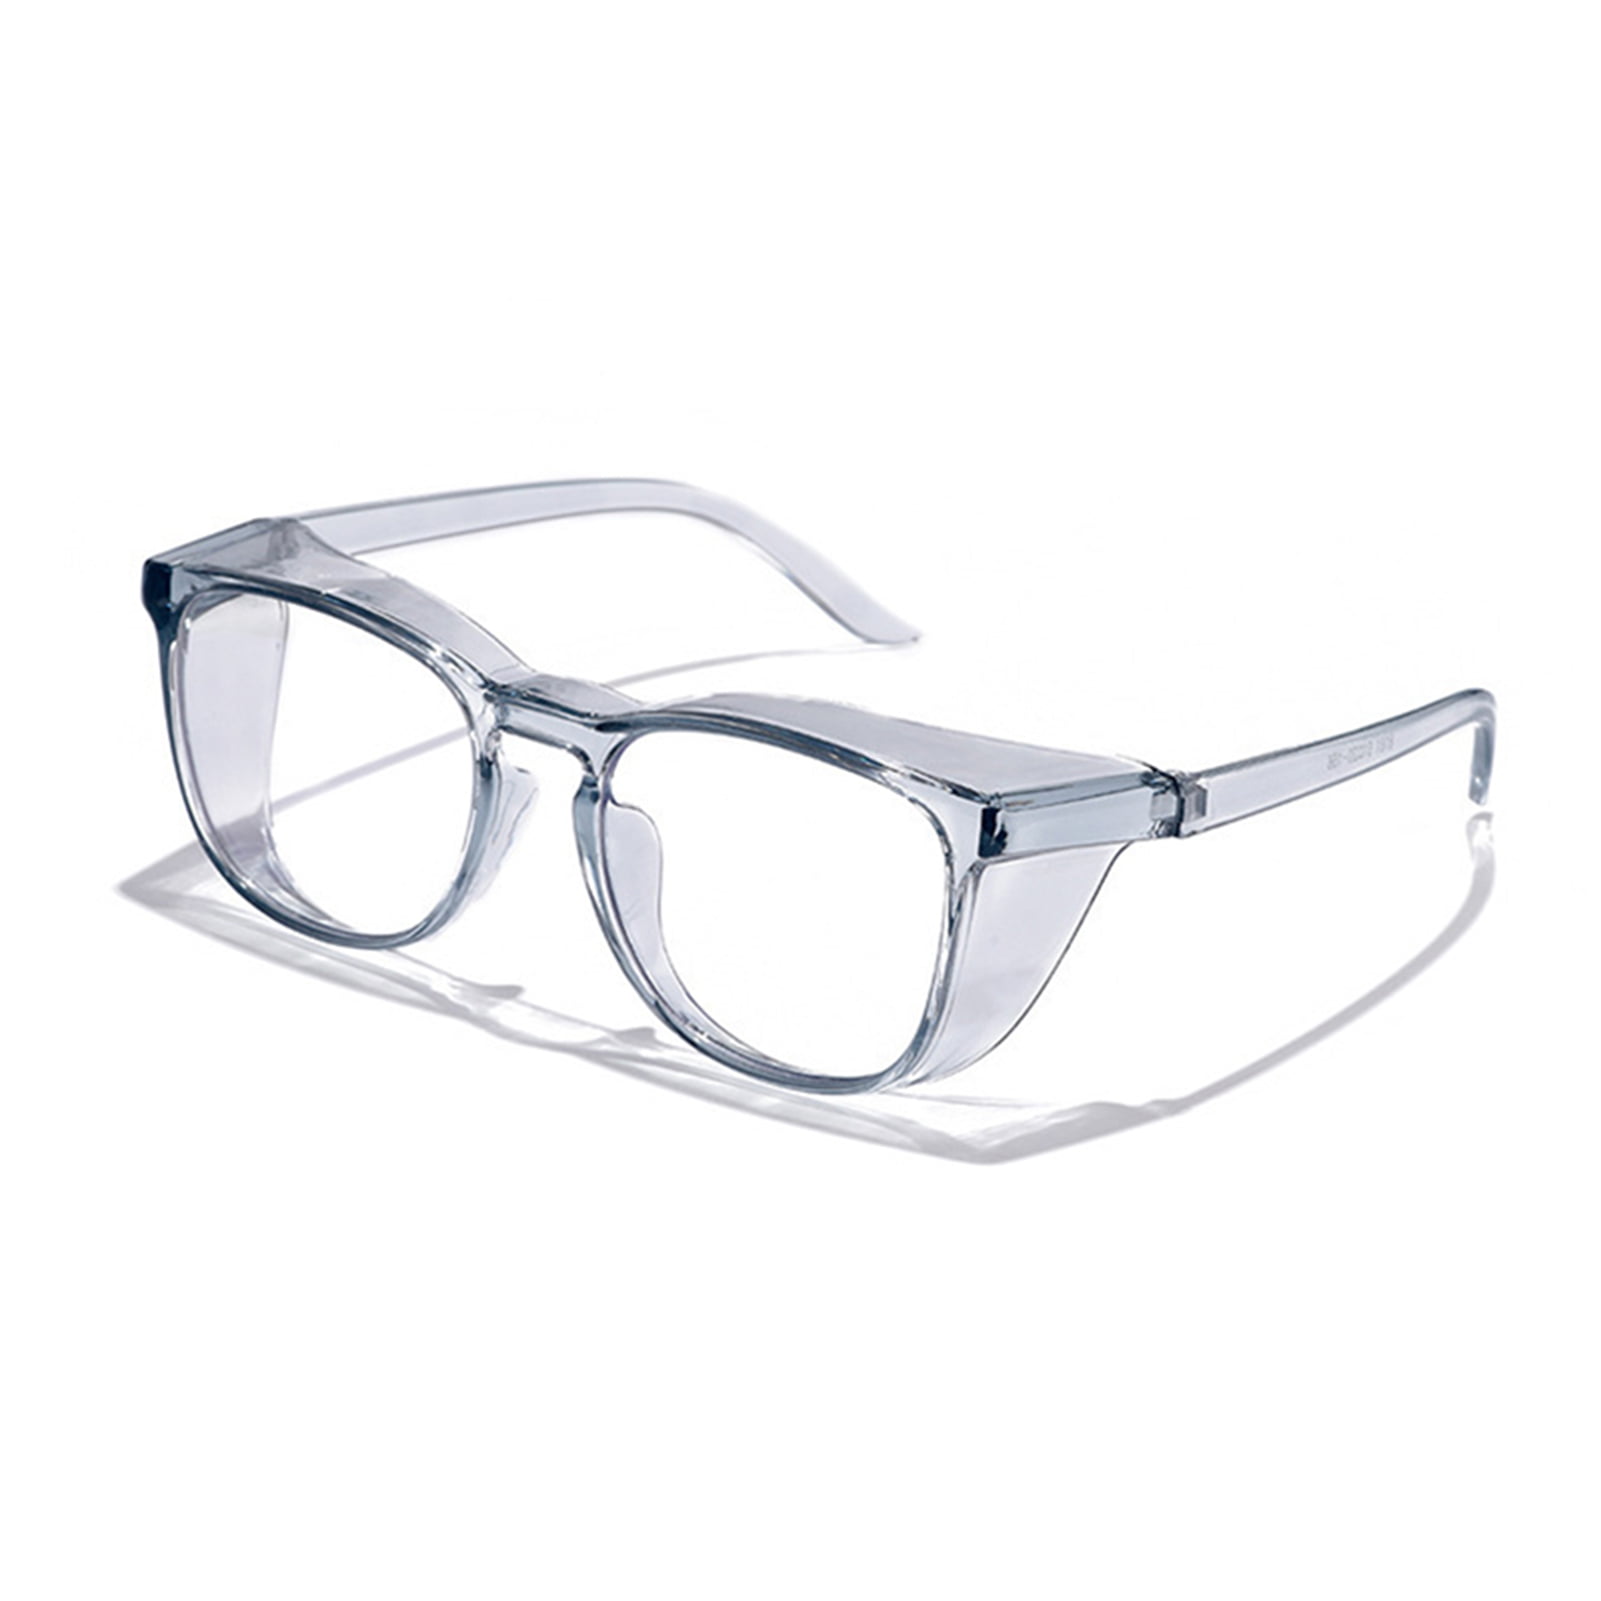 Goggles Safety Goggles Blue Light Blocking Glasses Anti Fog Safety Glasses 